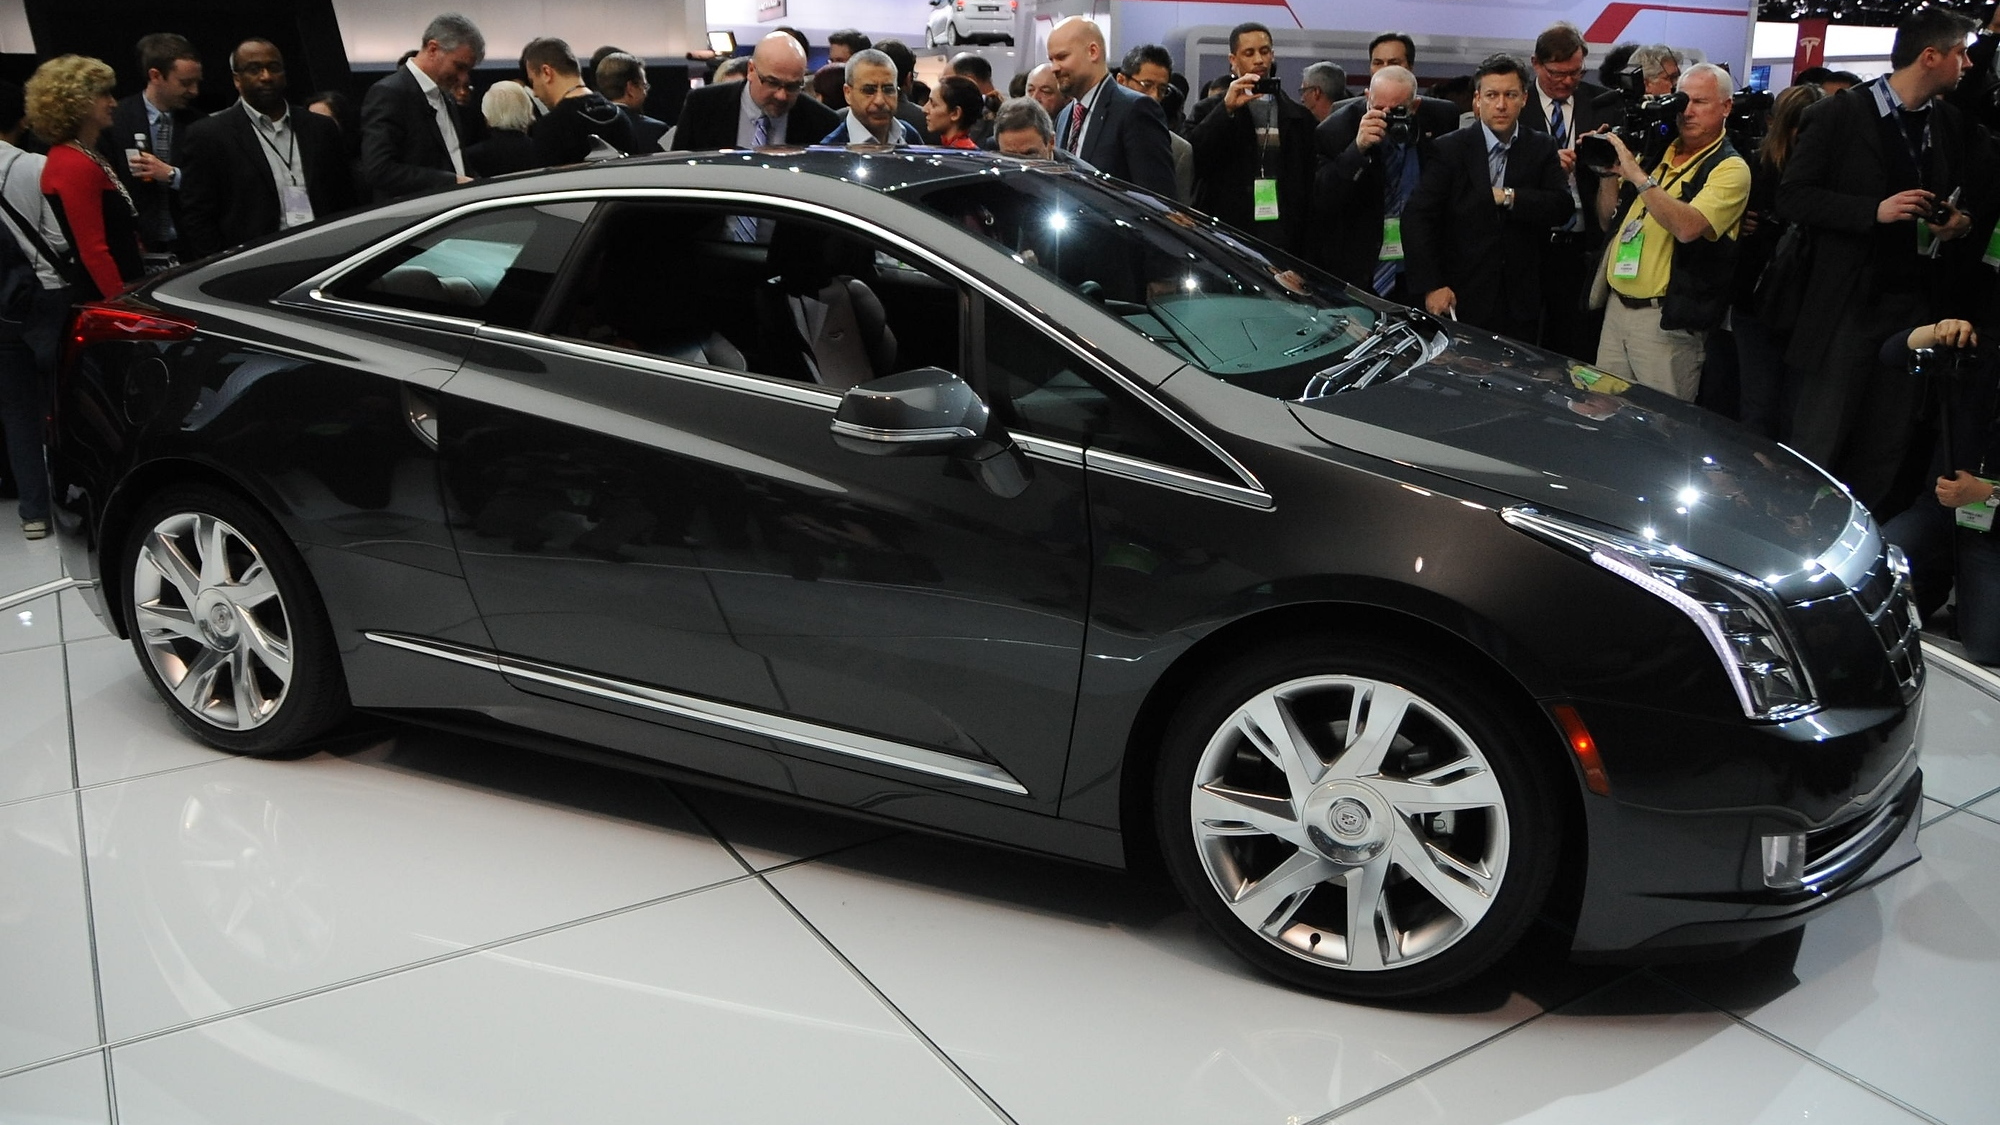 2014 Cadillac ELR revealed at 2013 Detroit Auto Show